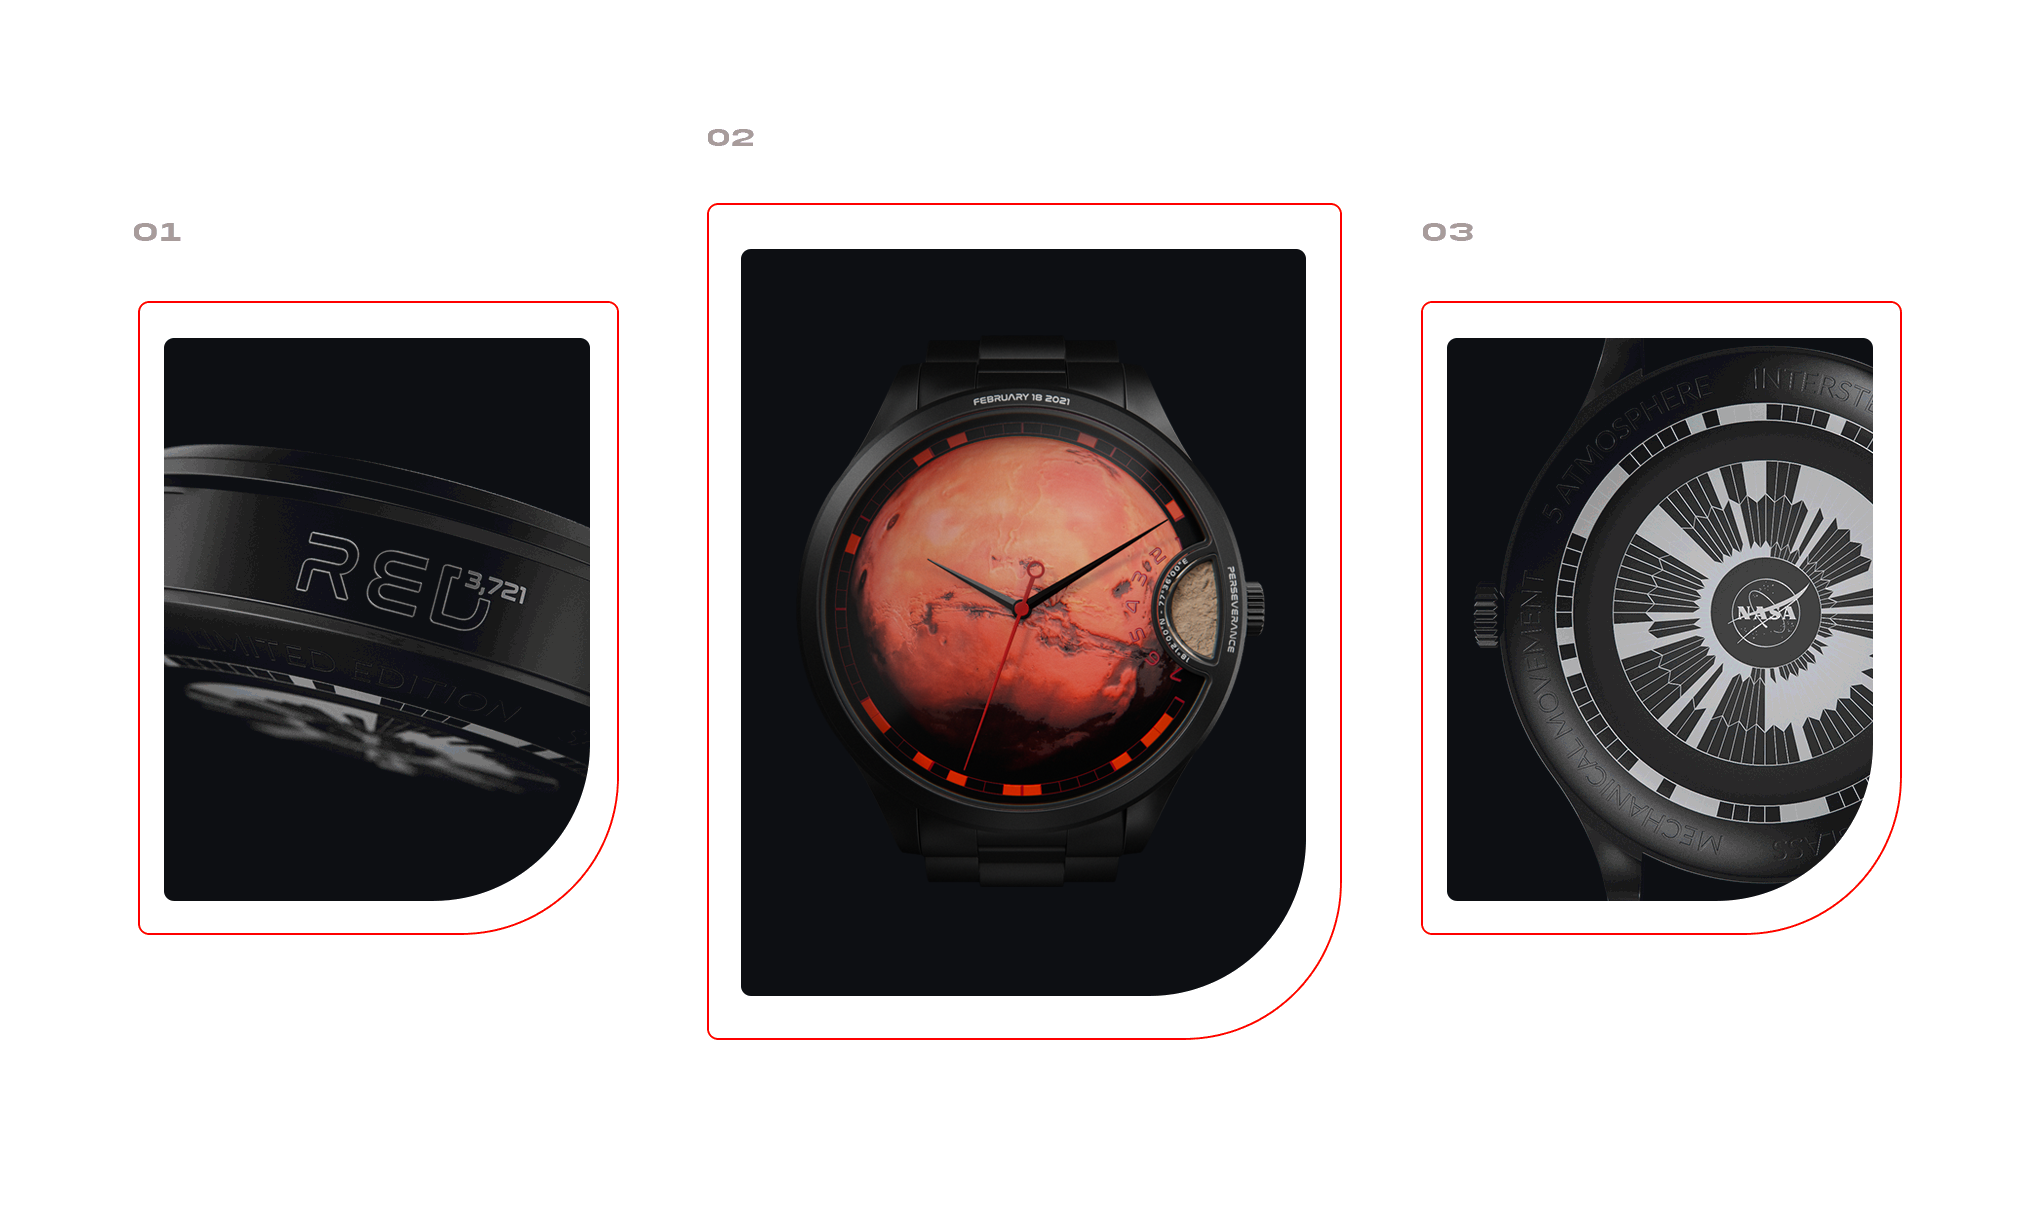 RED3,721 - The Automatic Watch with Meteorite Moon Dust